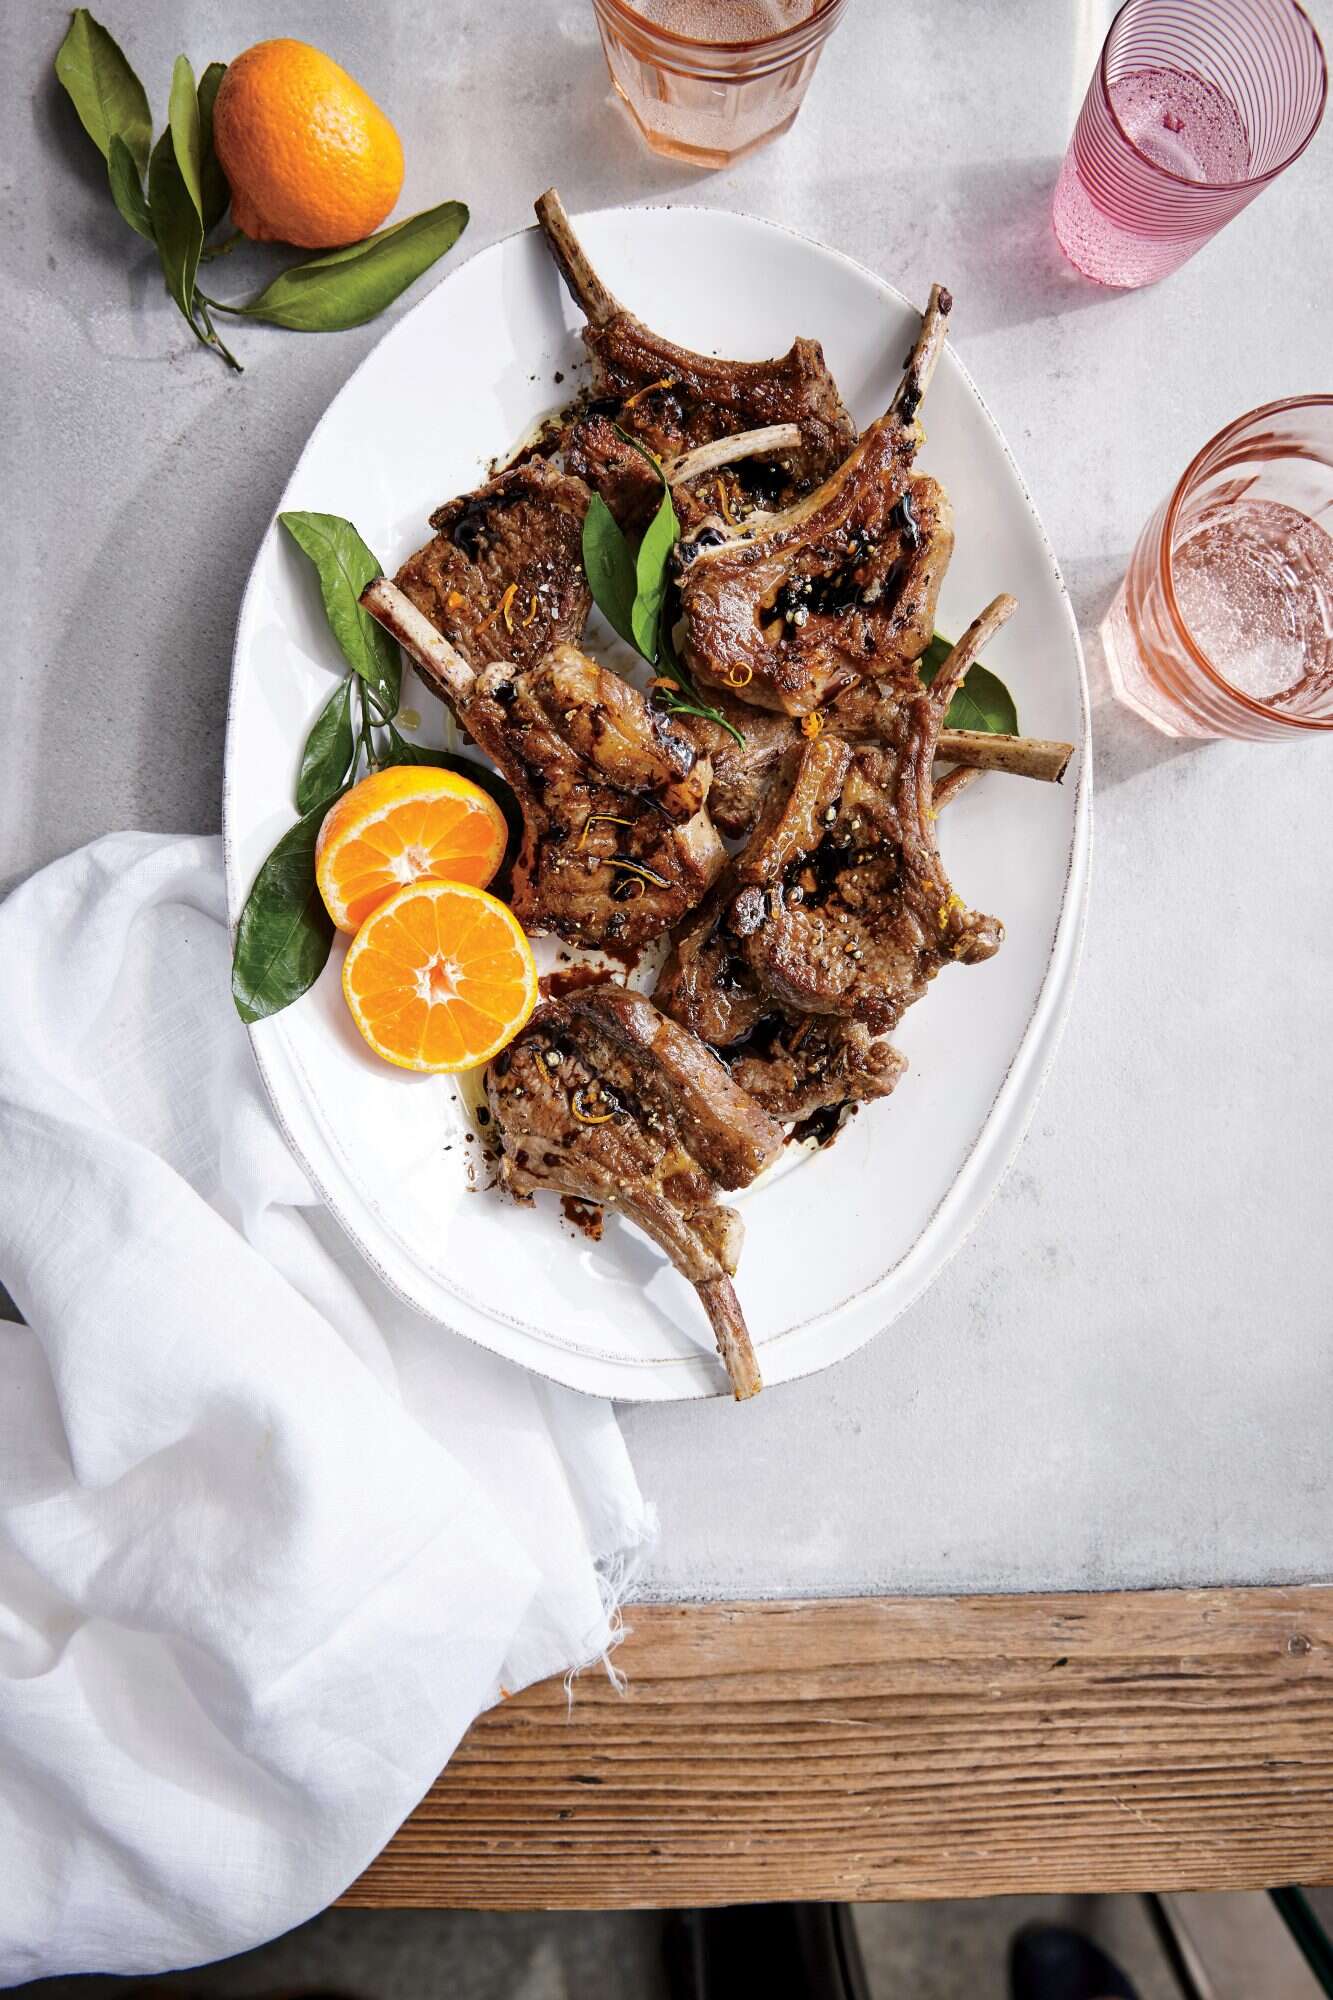 Lamb Chops with Balsamic Reduction Recipe